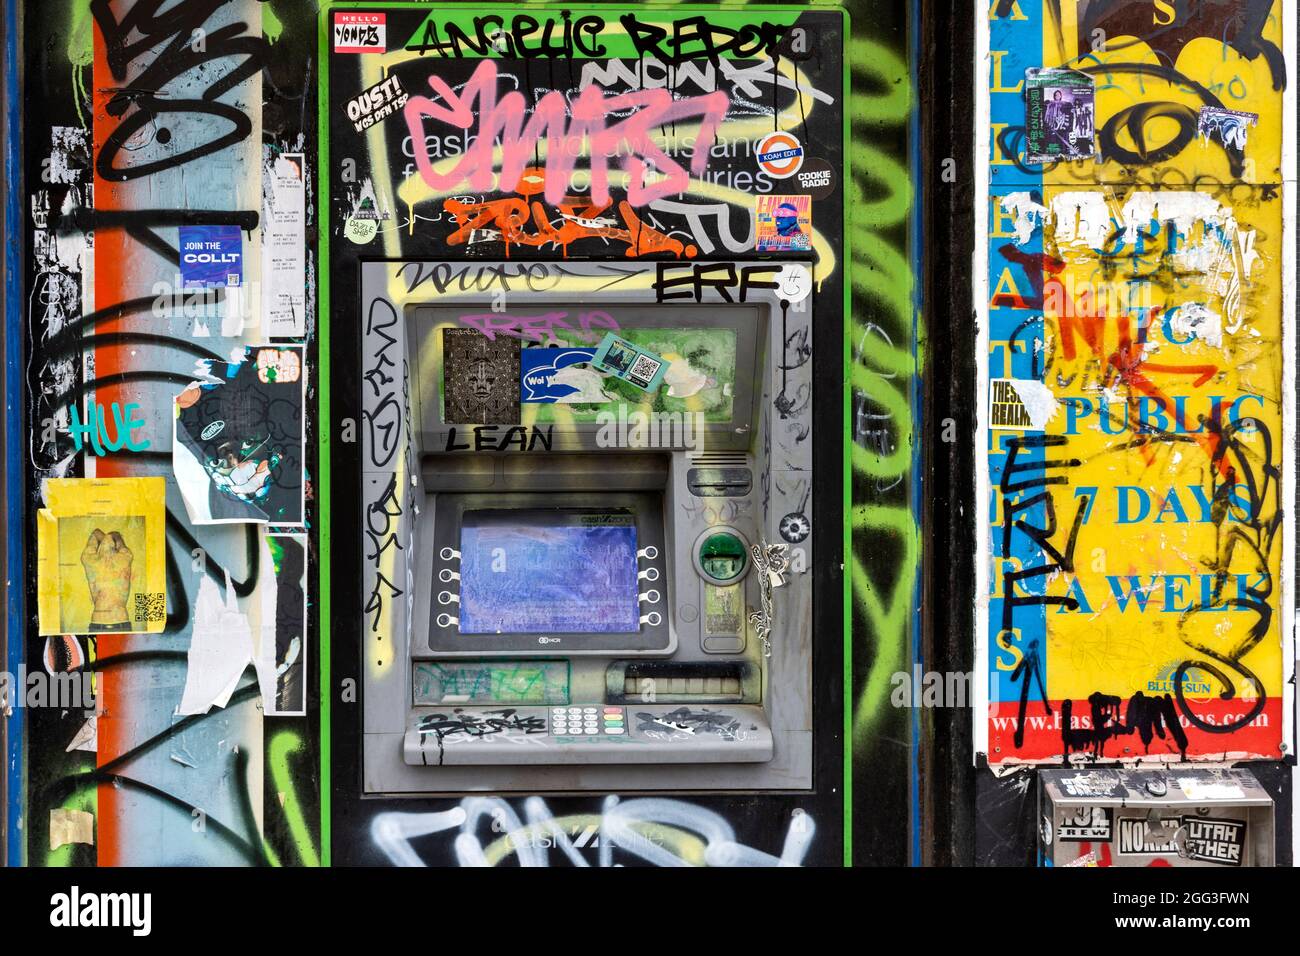 LONDON ARTISTIC AND CULTURAL AREA AROUND BRICK LANE WITH CREATIVE DESIGNS AN OLD ATM OR CASH MACHINE AND GRAFFITI Stock Photo